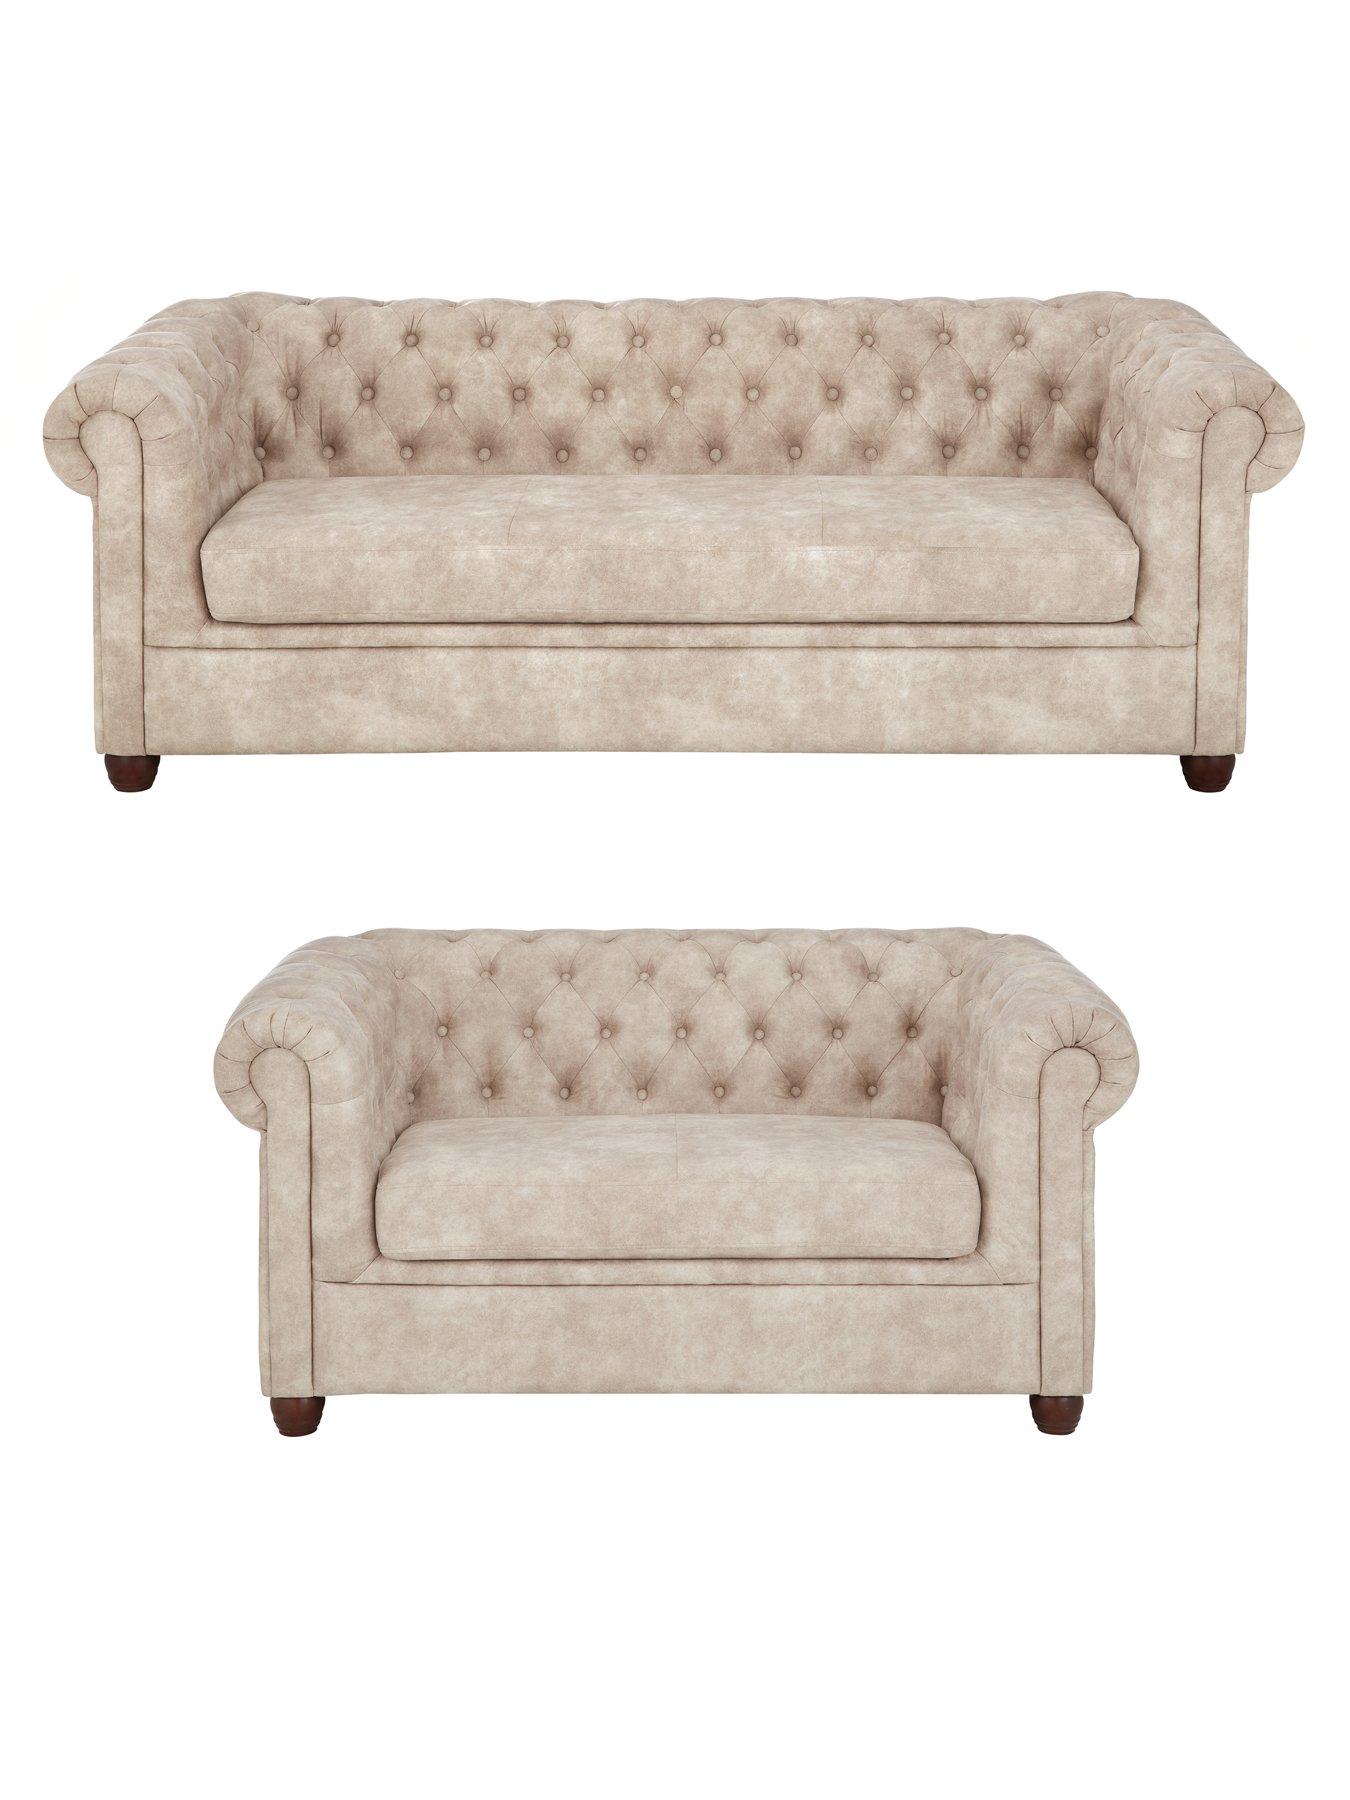 Very Home Chester Chesterfield Leather Look 3 Seater + 2 Seater Sofa Set -  Pebble (Buy and SAVE!)